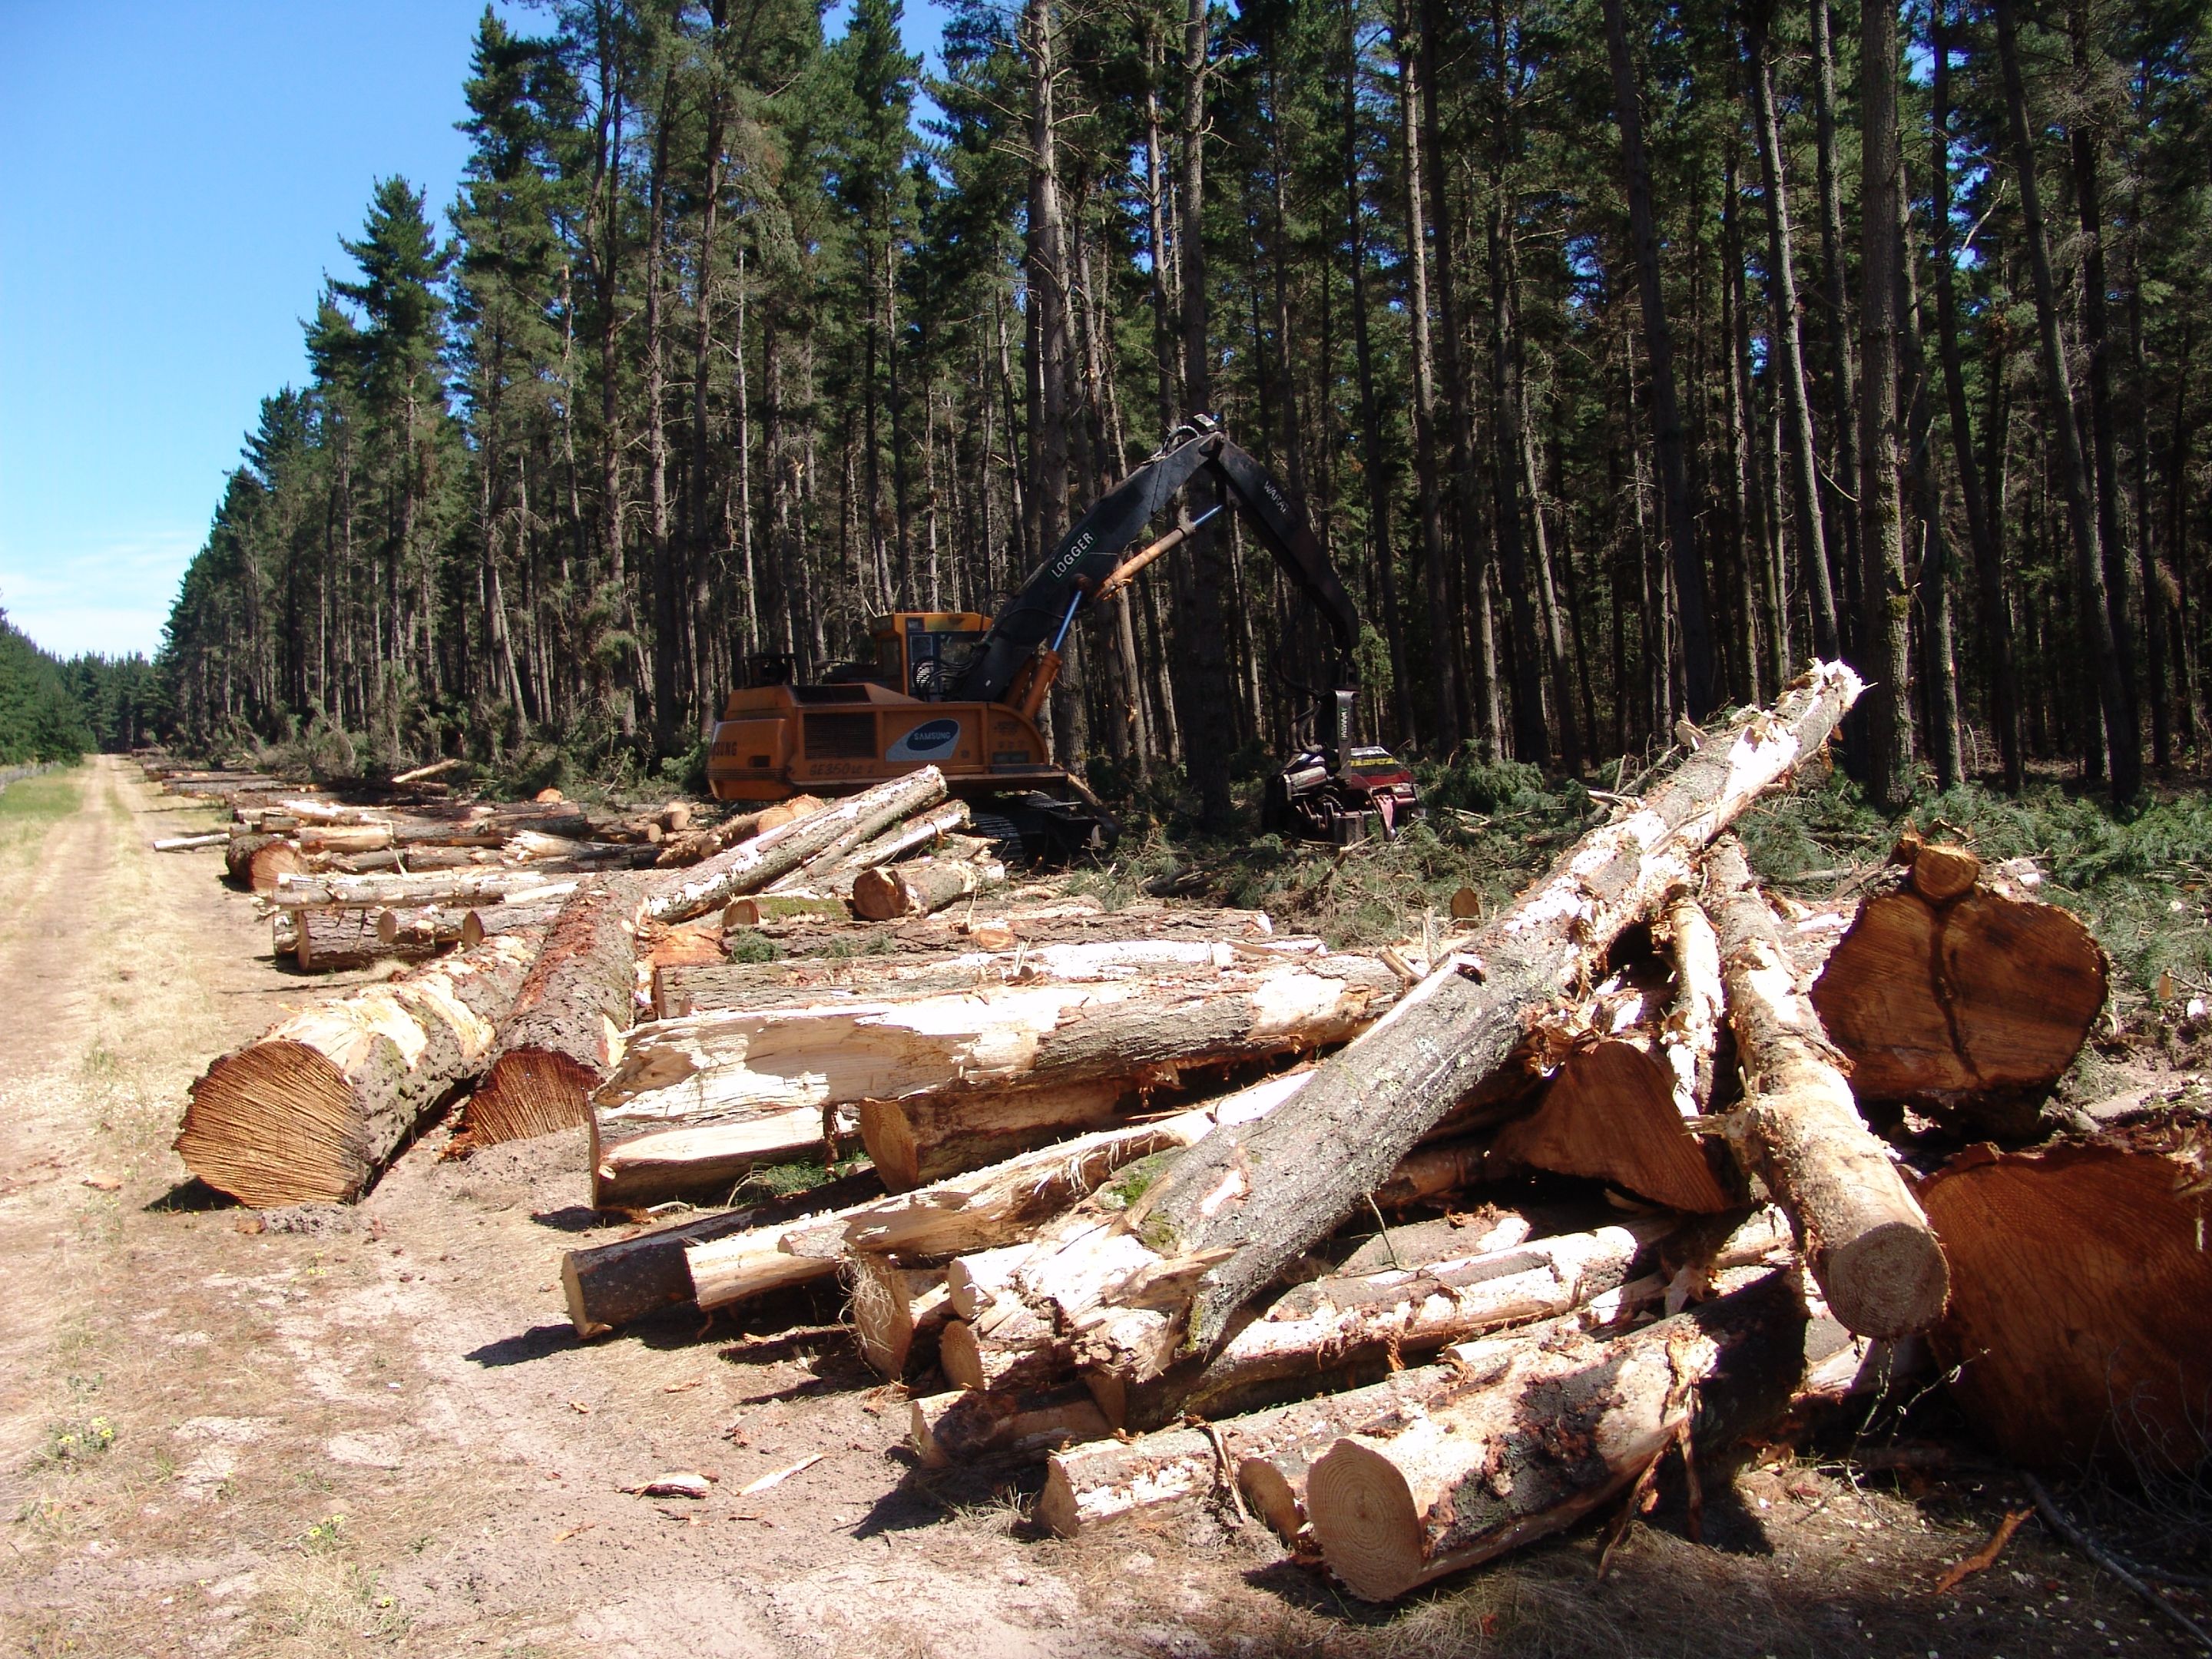 An excavator next to a forest of pine trees and some cut down pine trees